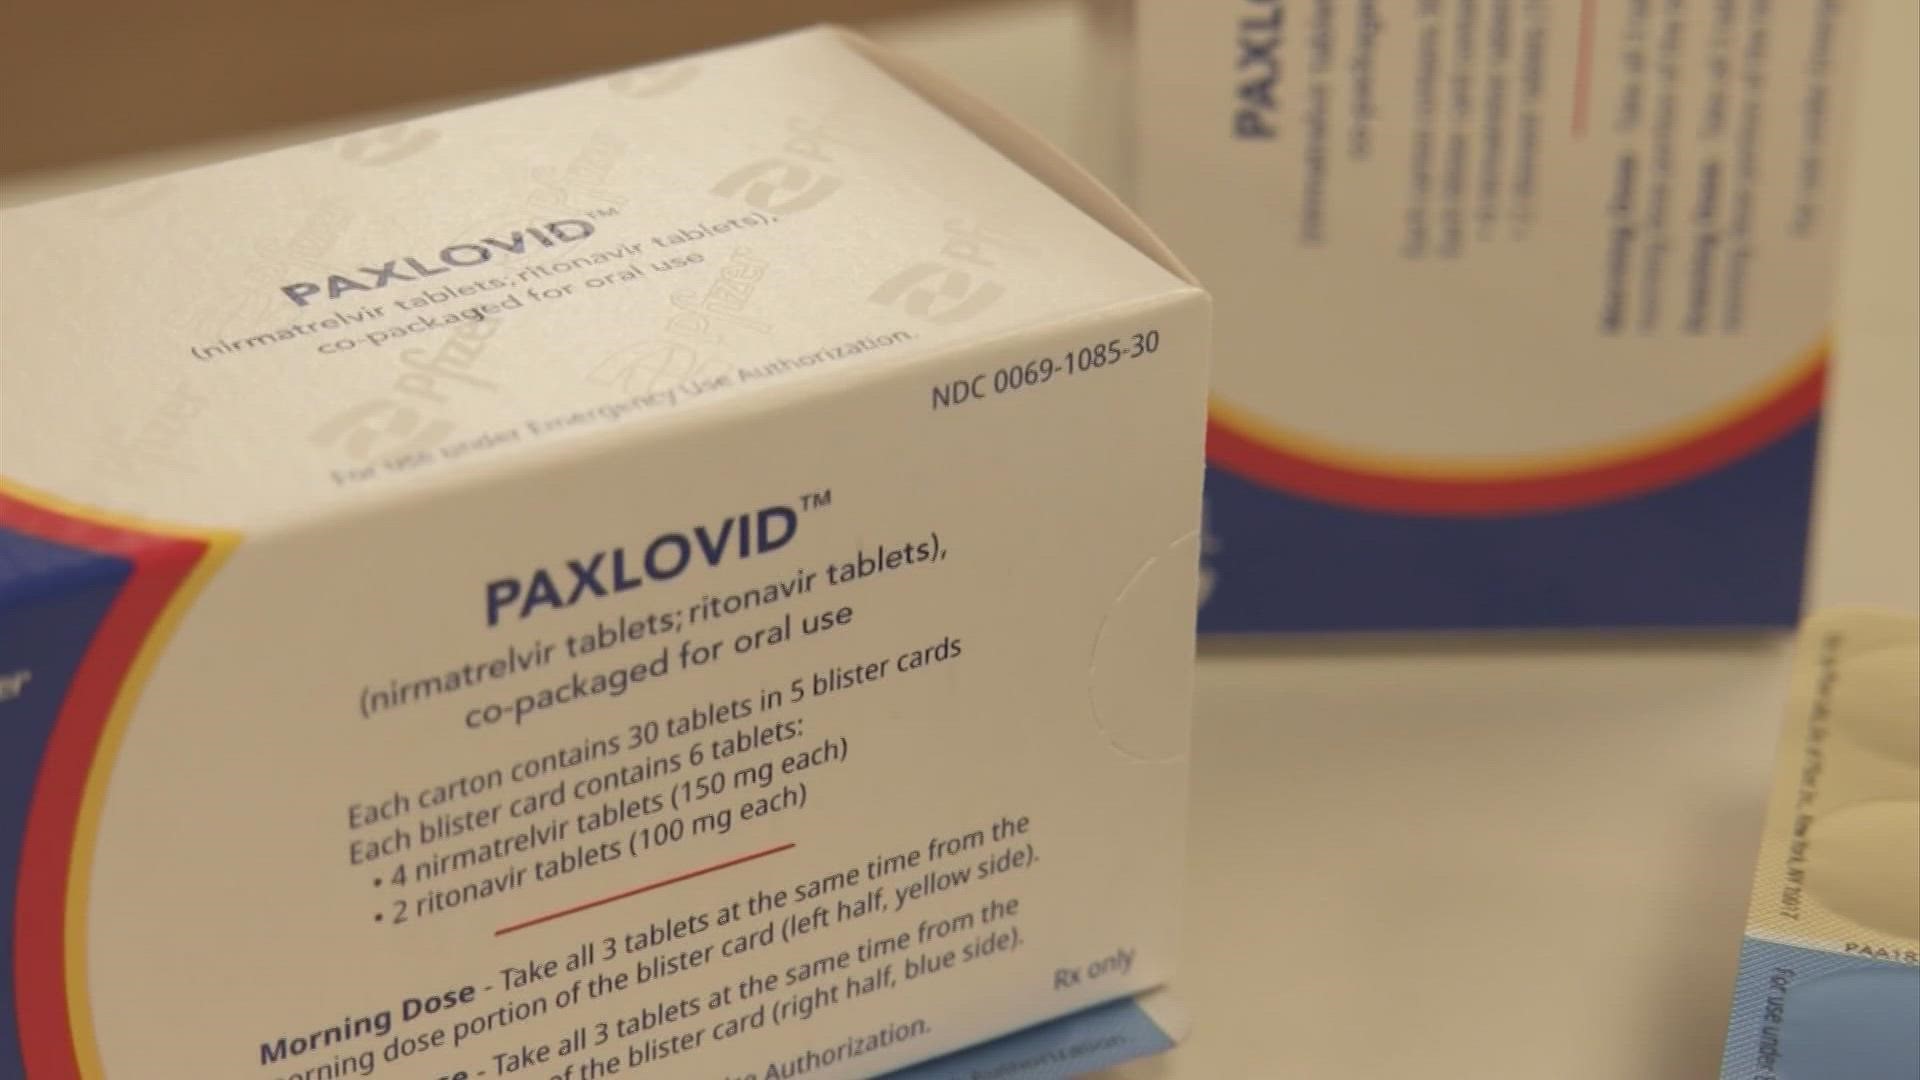 Paxlovid was created to help prevent severe illness and death from COVID-19.